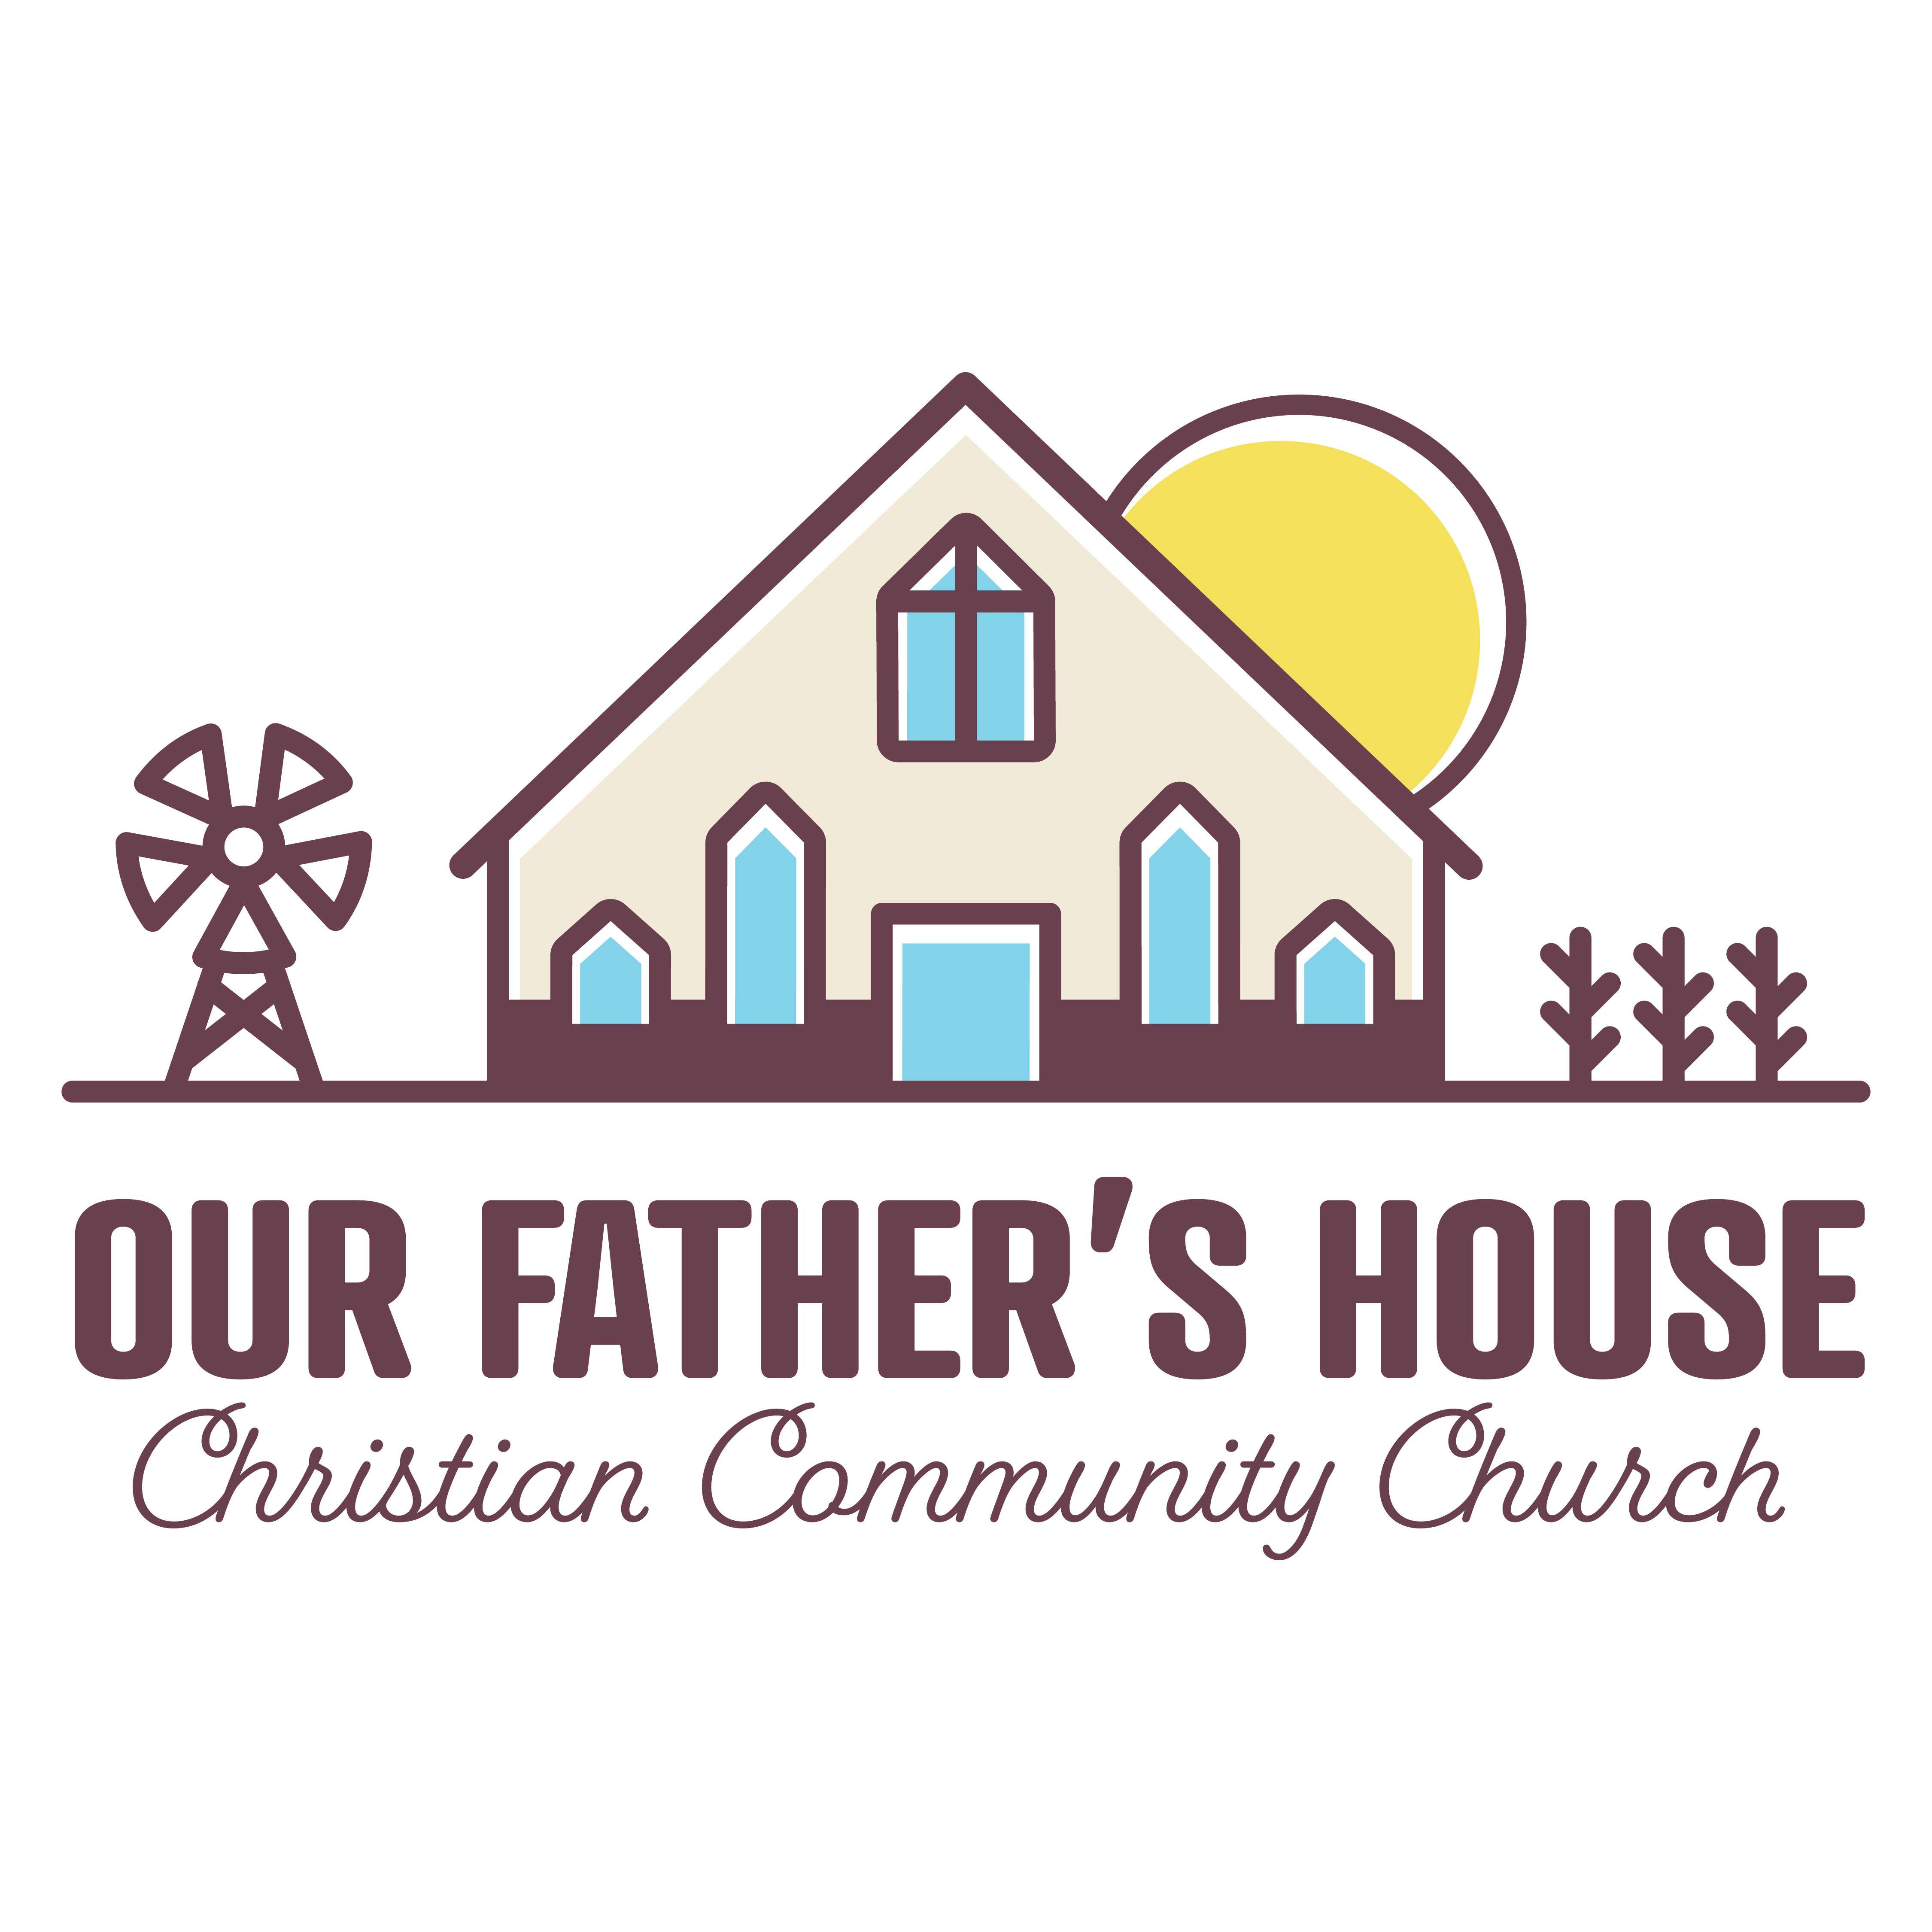 Our Father's House Christian Community Church